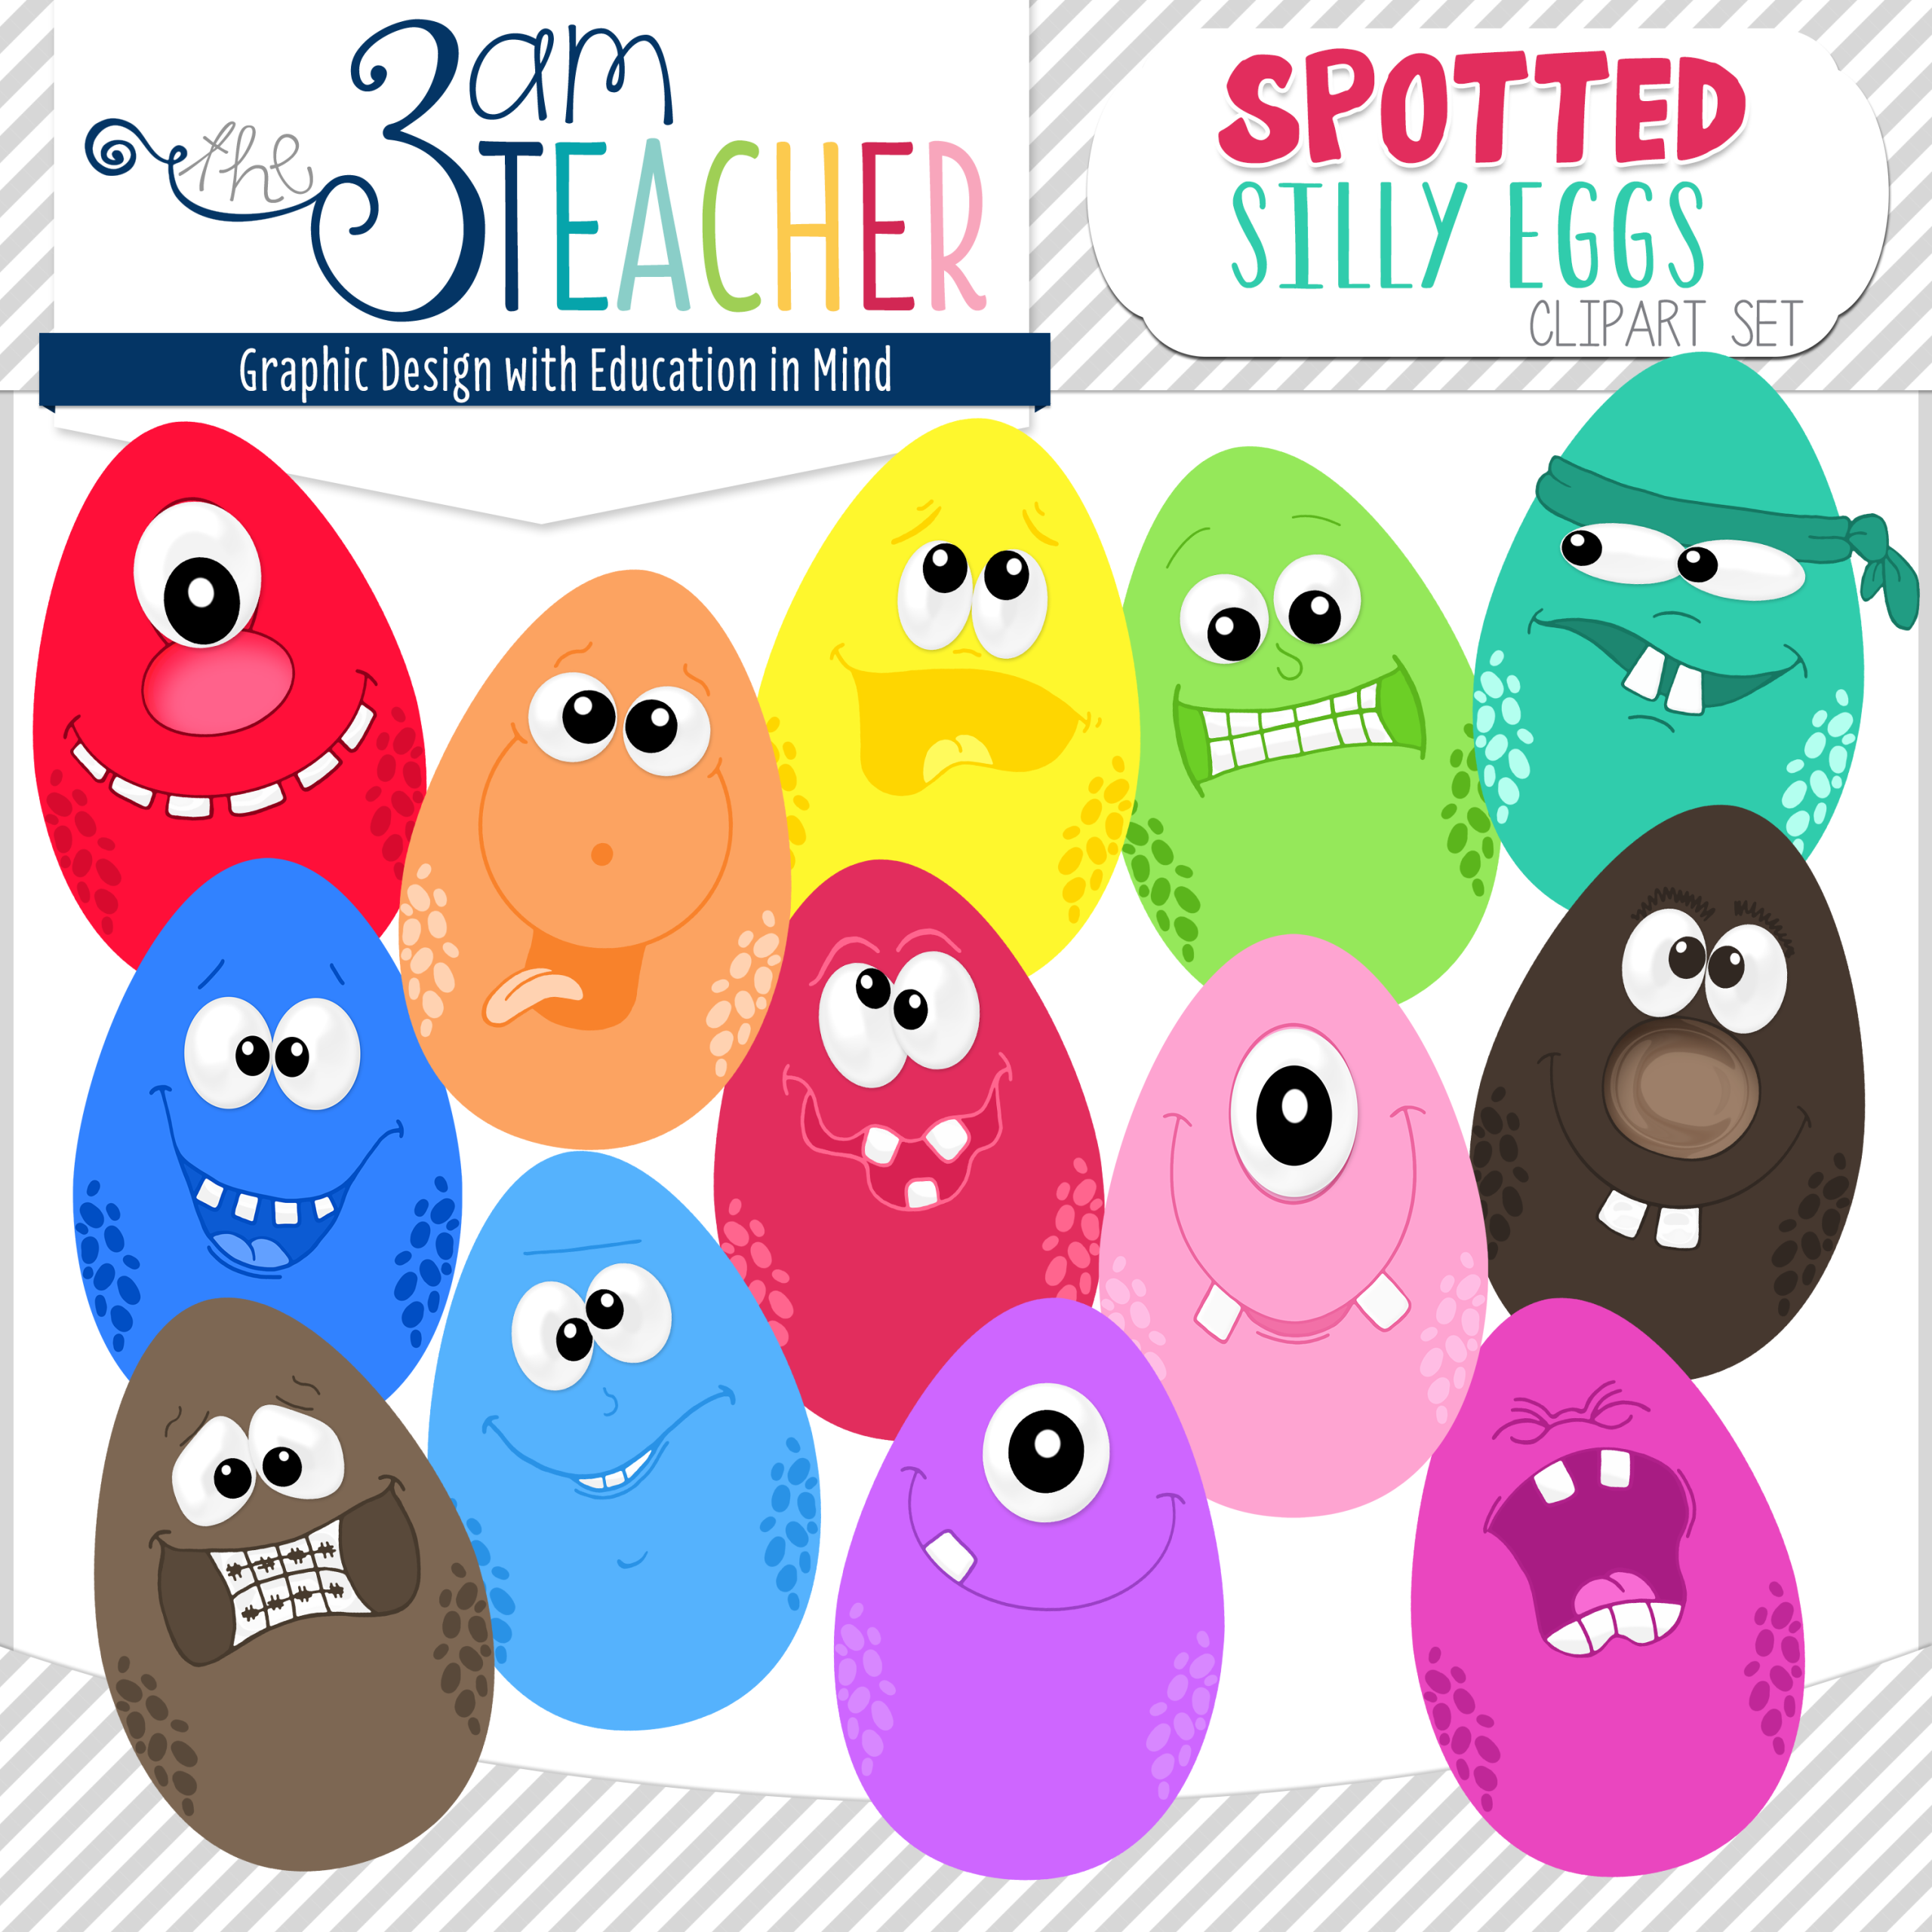 Spotted Silly Character Eggs Clip Art Set      The 3am Teacher